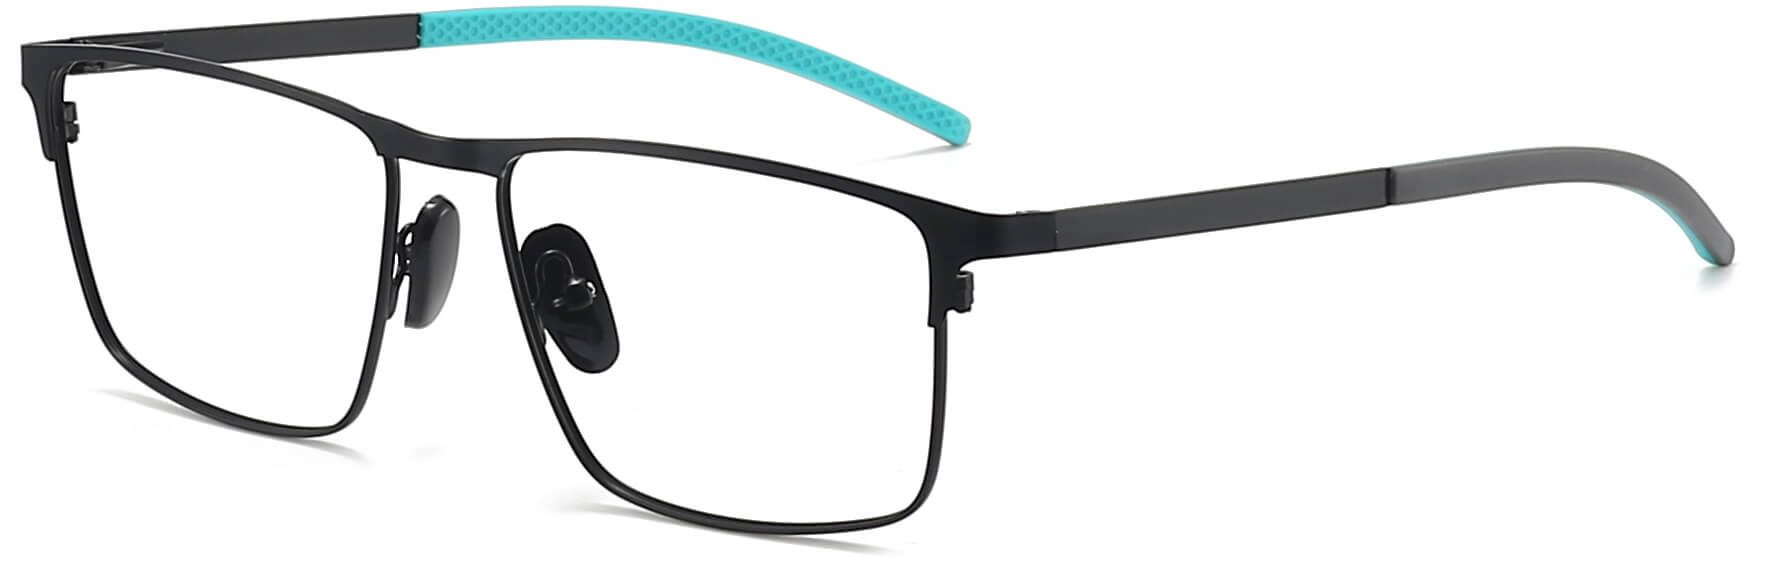 Harry Square Black Eyeglasses from ANRRI, angle view